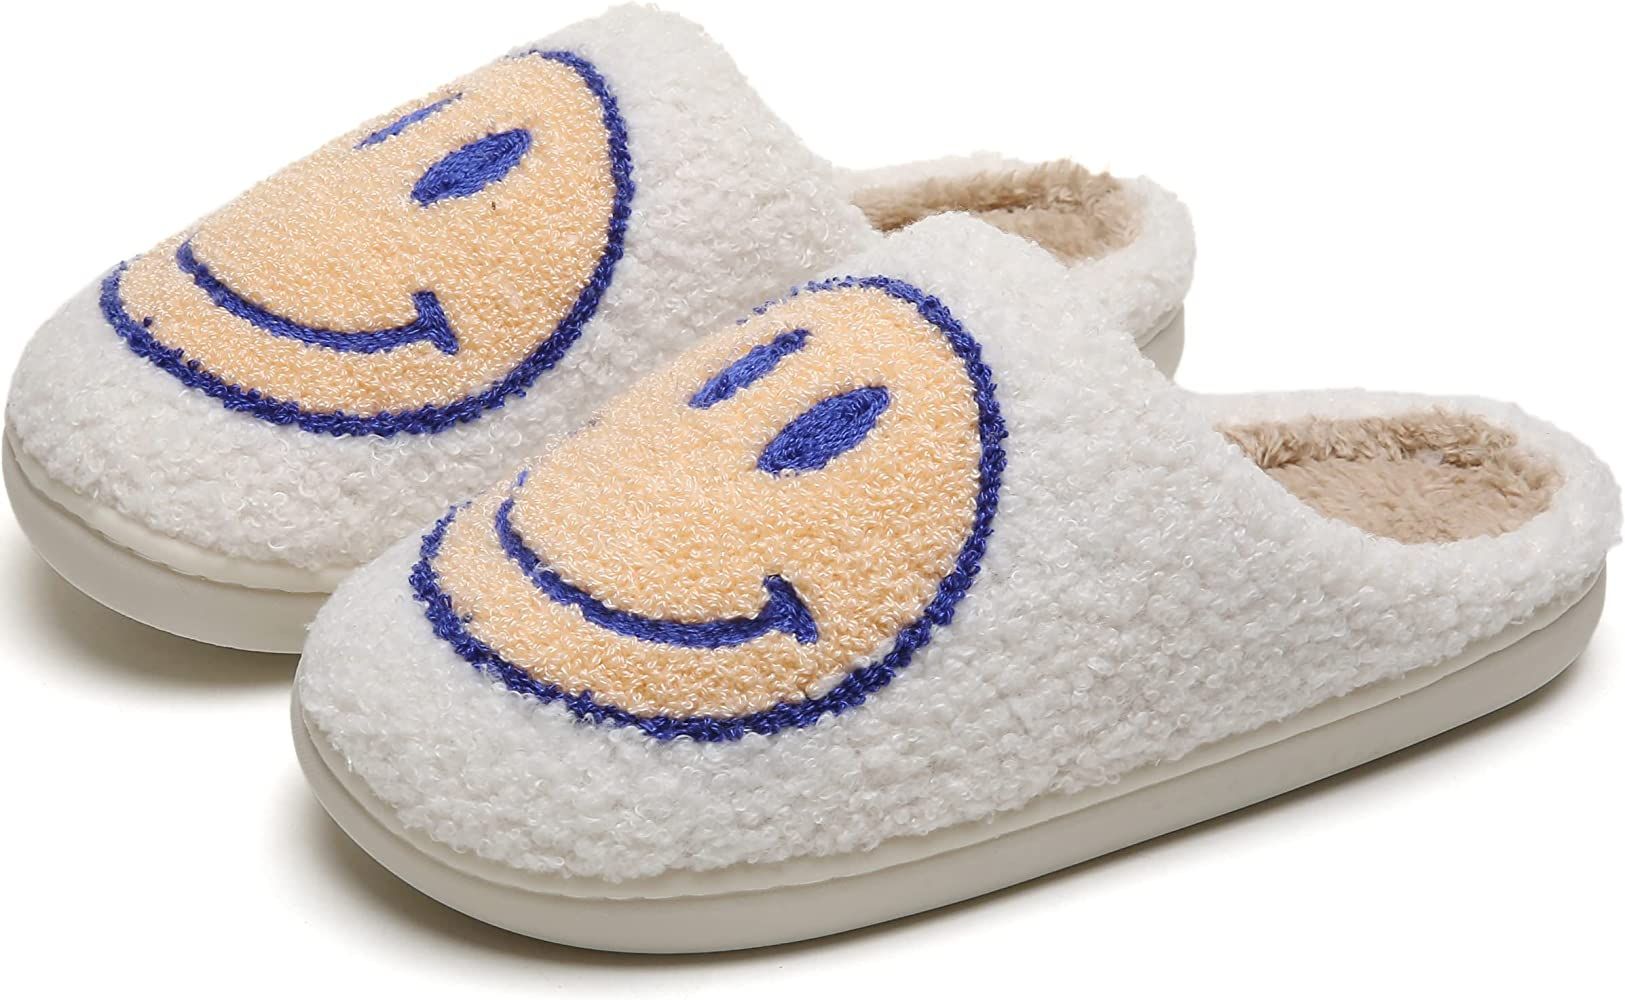 PLMOKN Slippers for women indoor and outdoor men open toe fluffy cute smiley face slippers | Amazon (US)